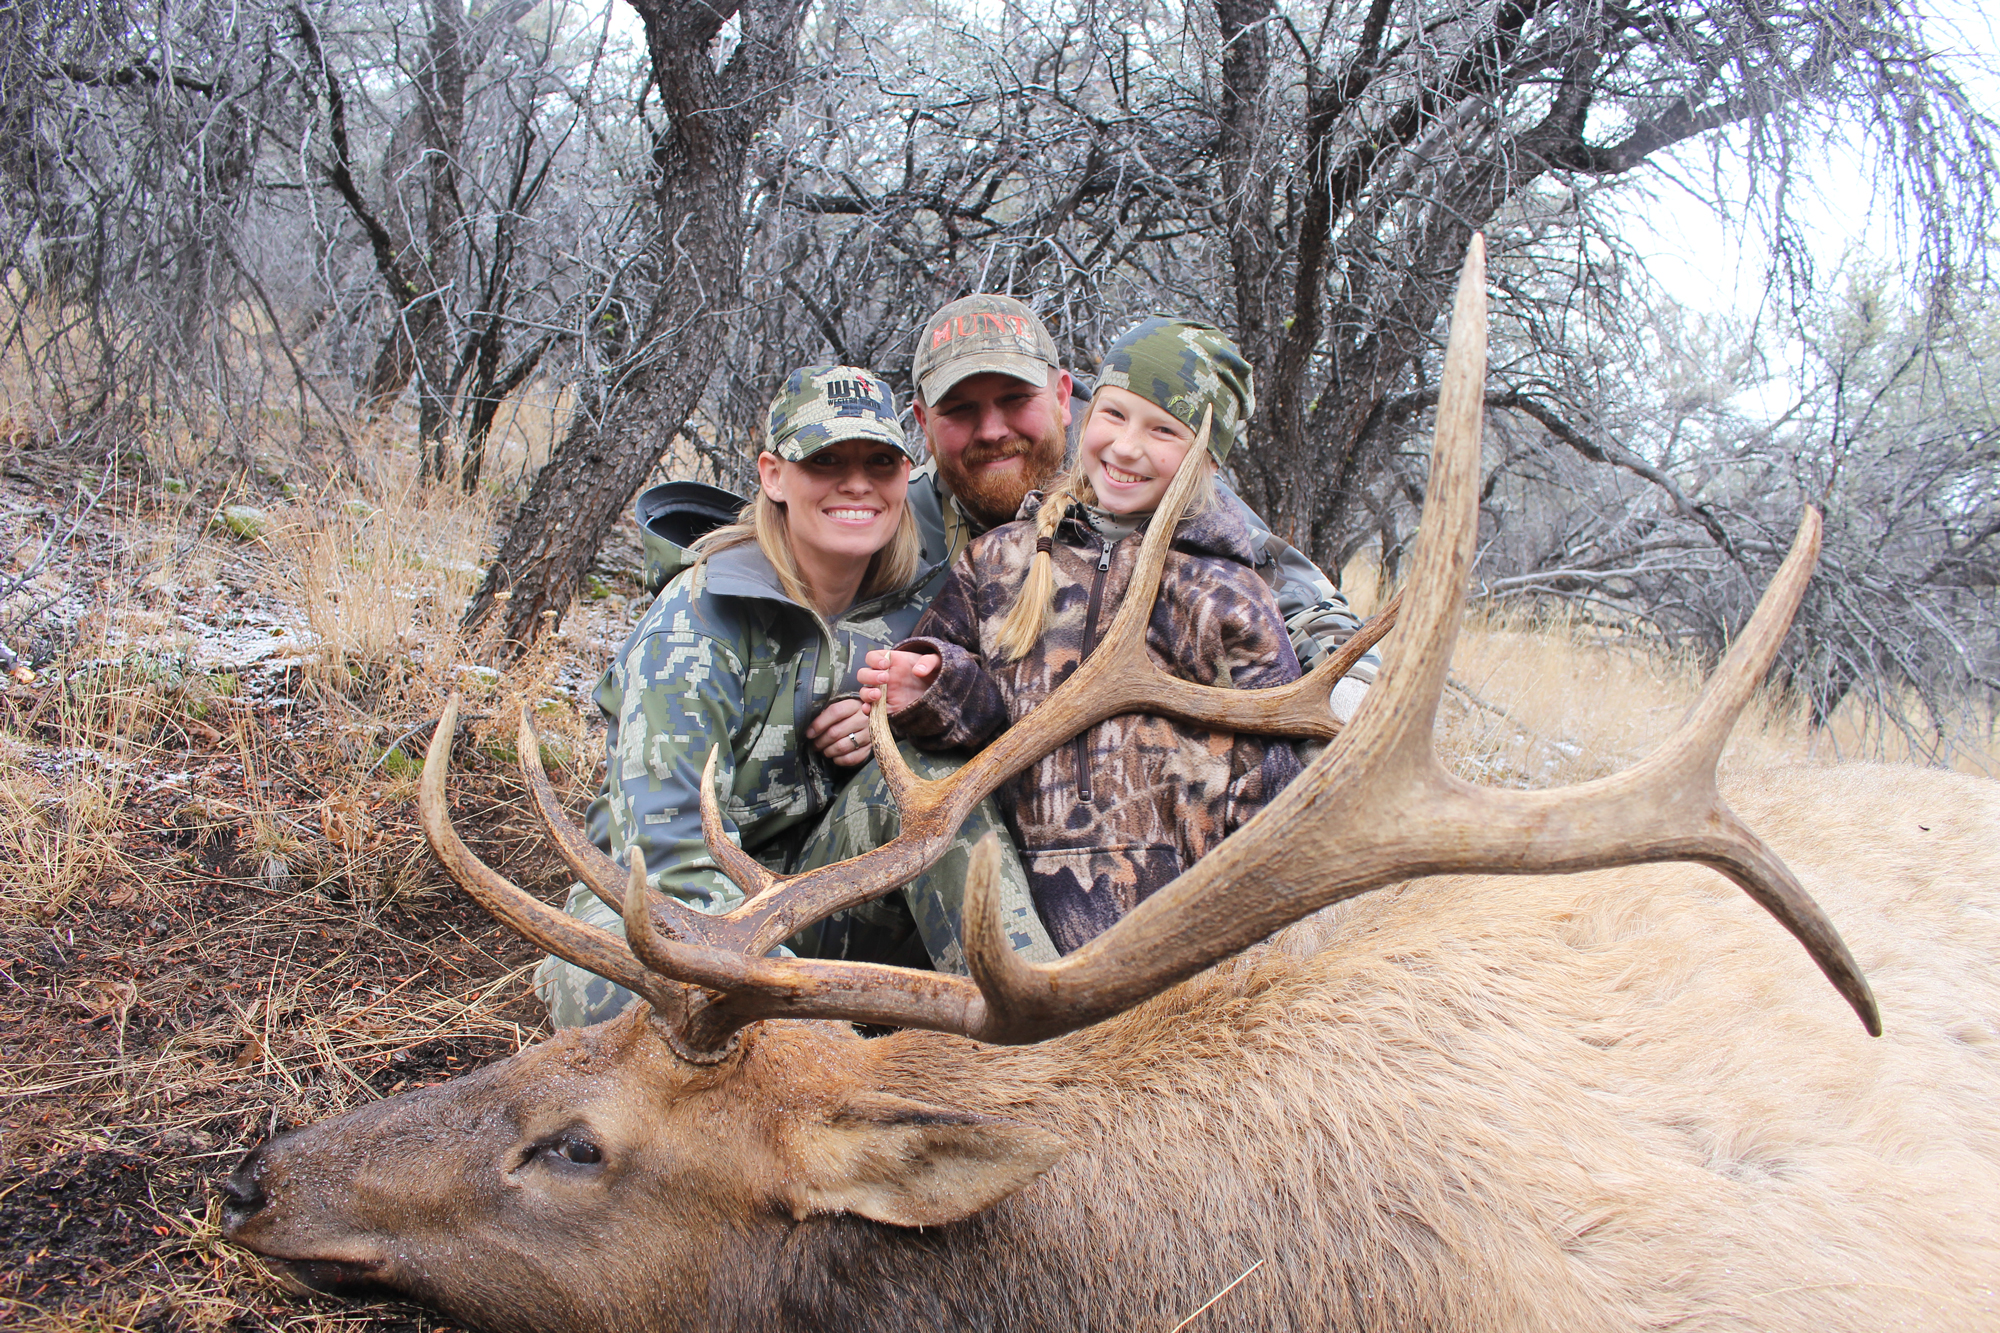 Zack and his family with a bull they shot in a new elk habitat.